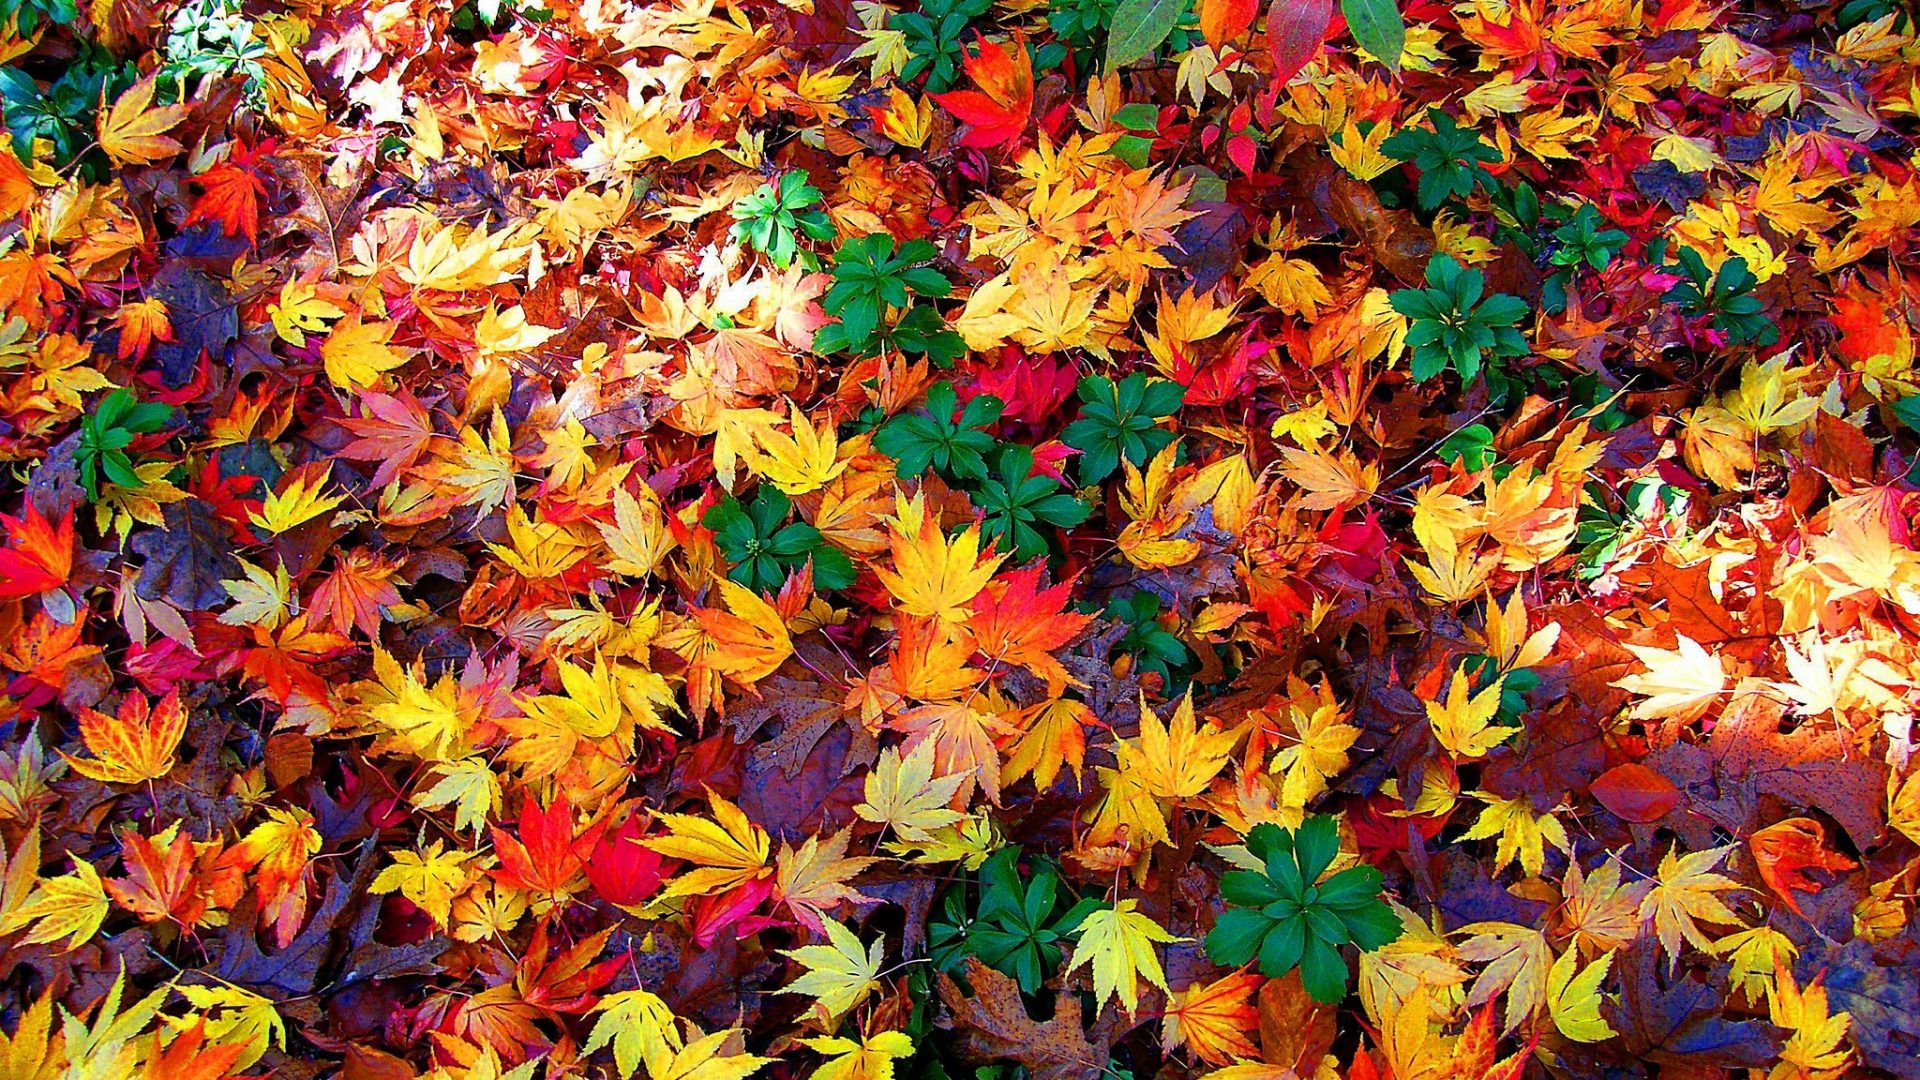 Misc Colorful Fall Leaves Autumn Wallpaper Gallery Leaves Facebook Cover